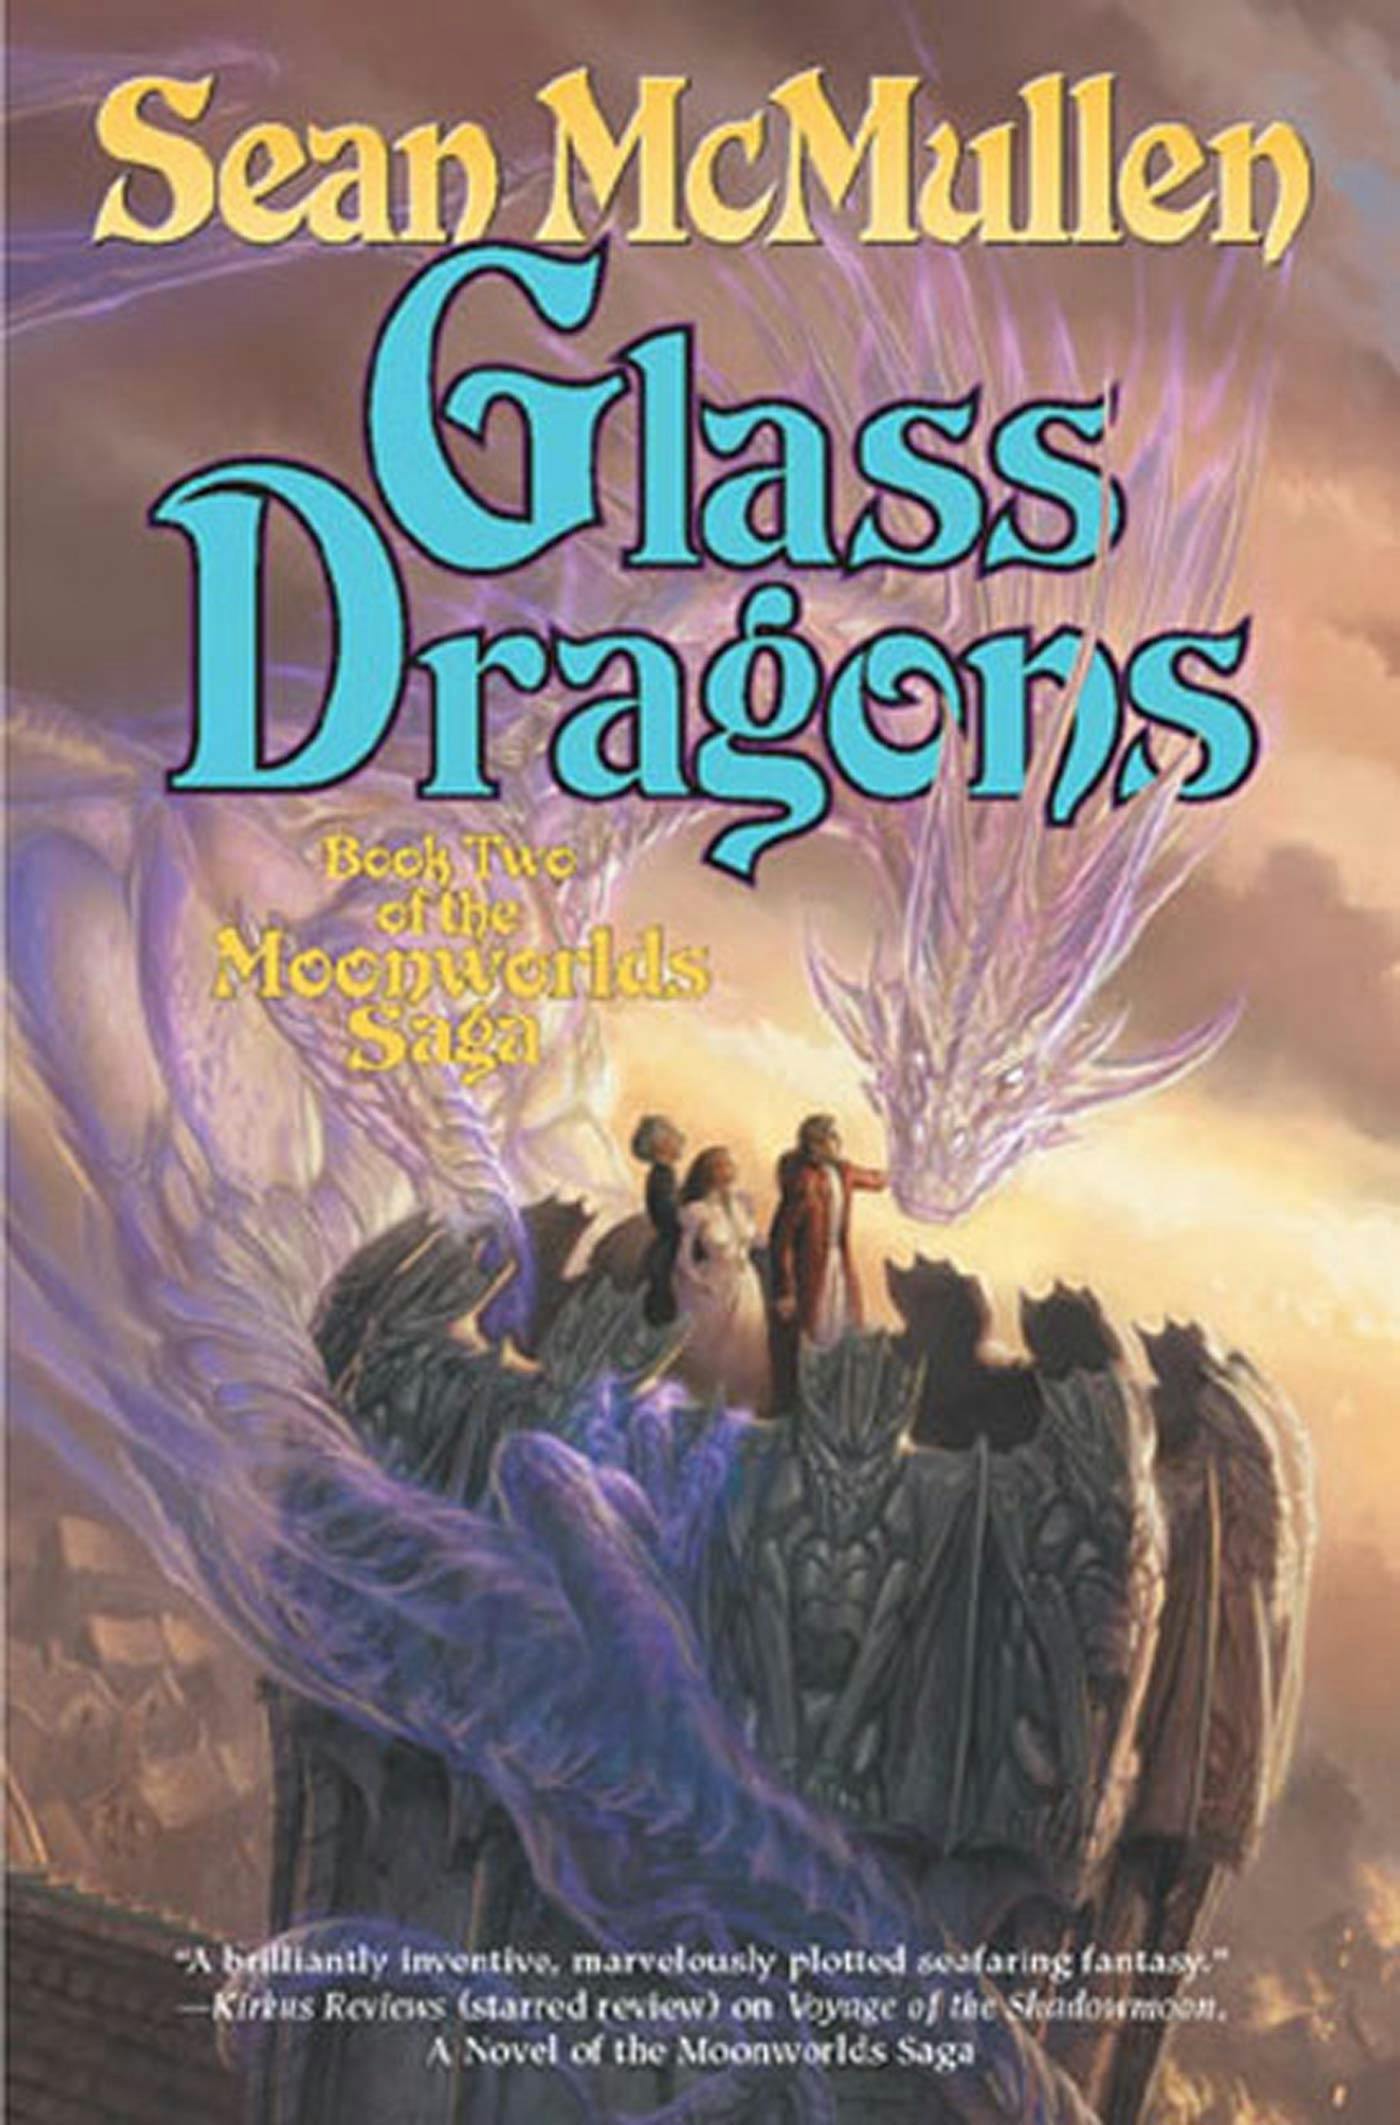 Cover for the book titled as: Glass Dragons